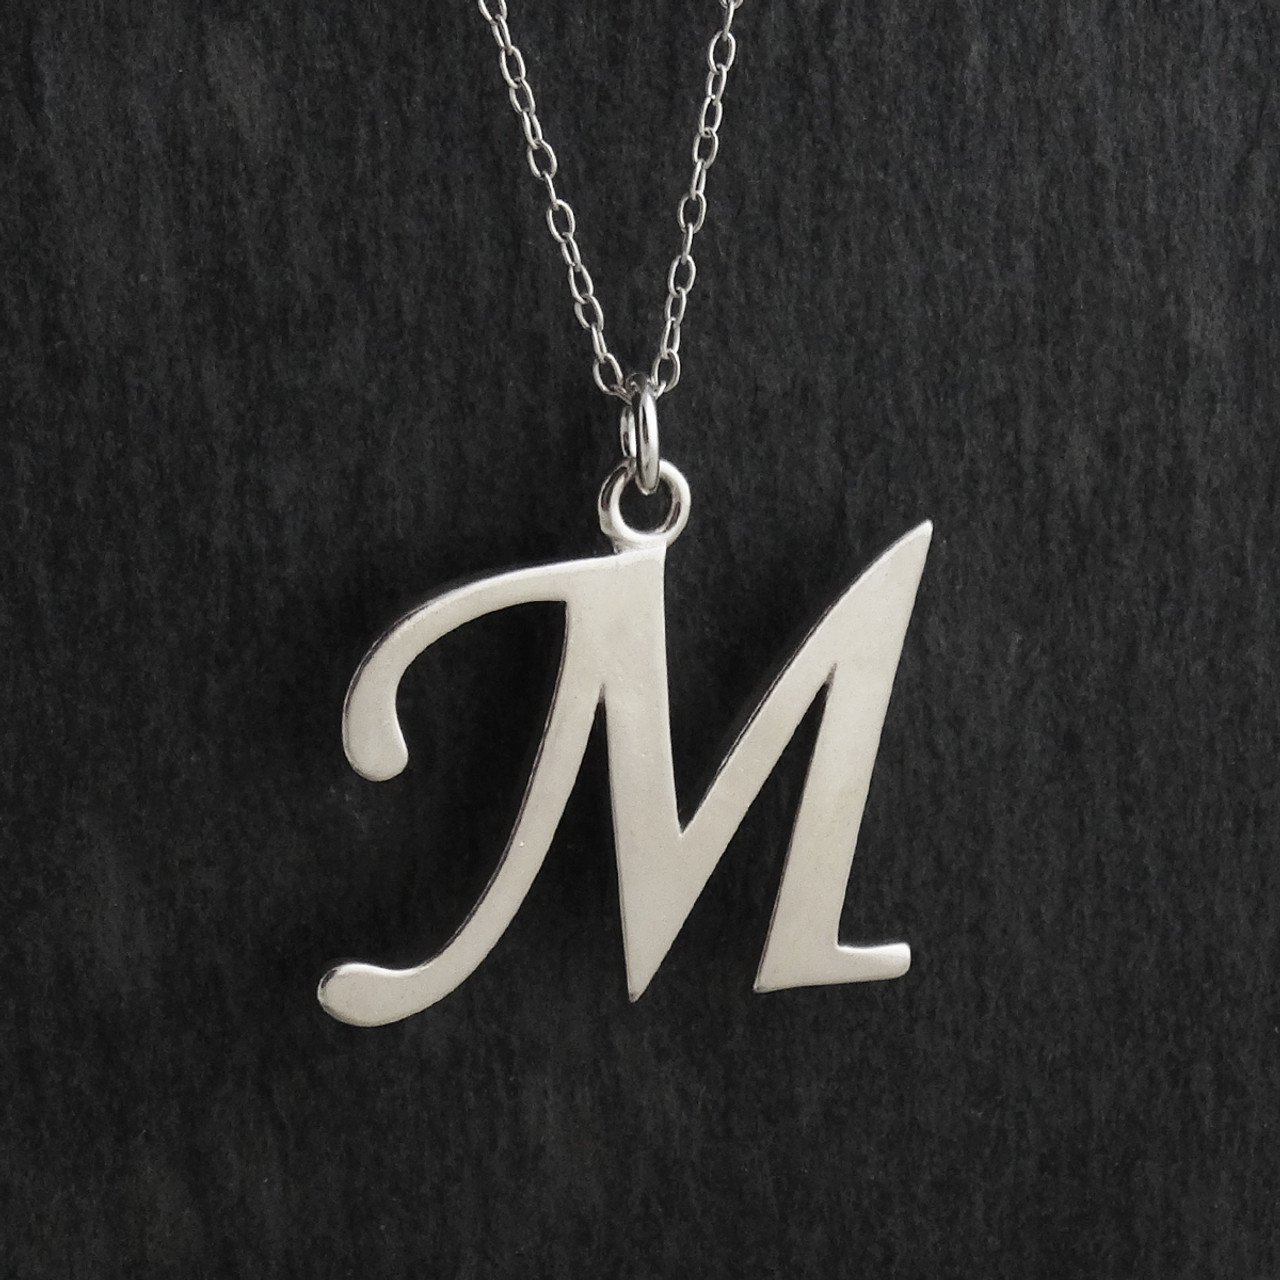 Amazon.com: Wednesday Necklace Wednesday Merchandise for Girls Wednesday  Necklace for Party Birthday Rotating Letter W Necklace M Necklace Wednesday  Decorations Favors for Women : Clothing, Shoes & Jewelry